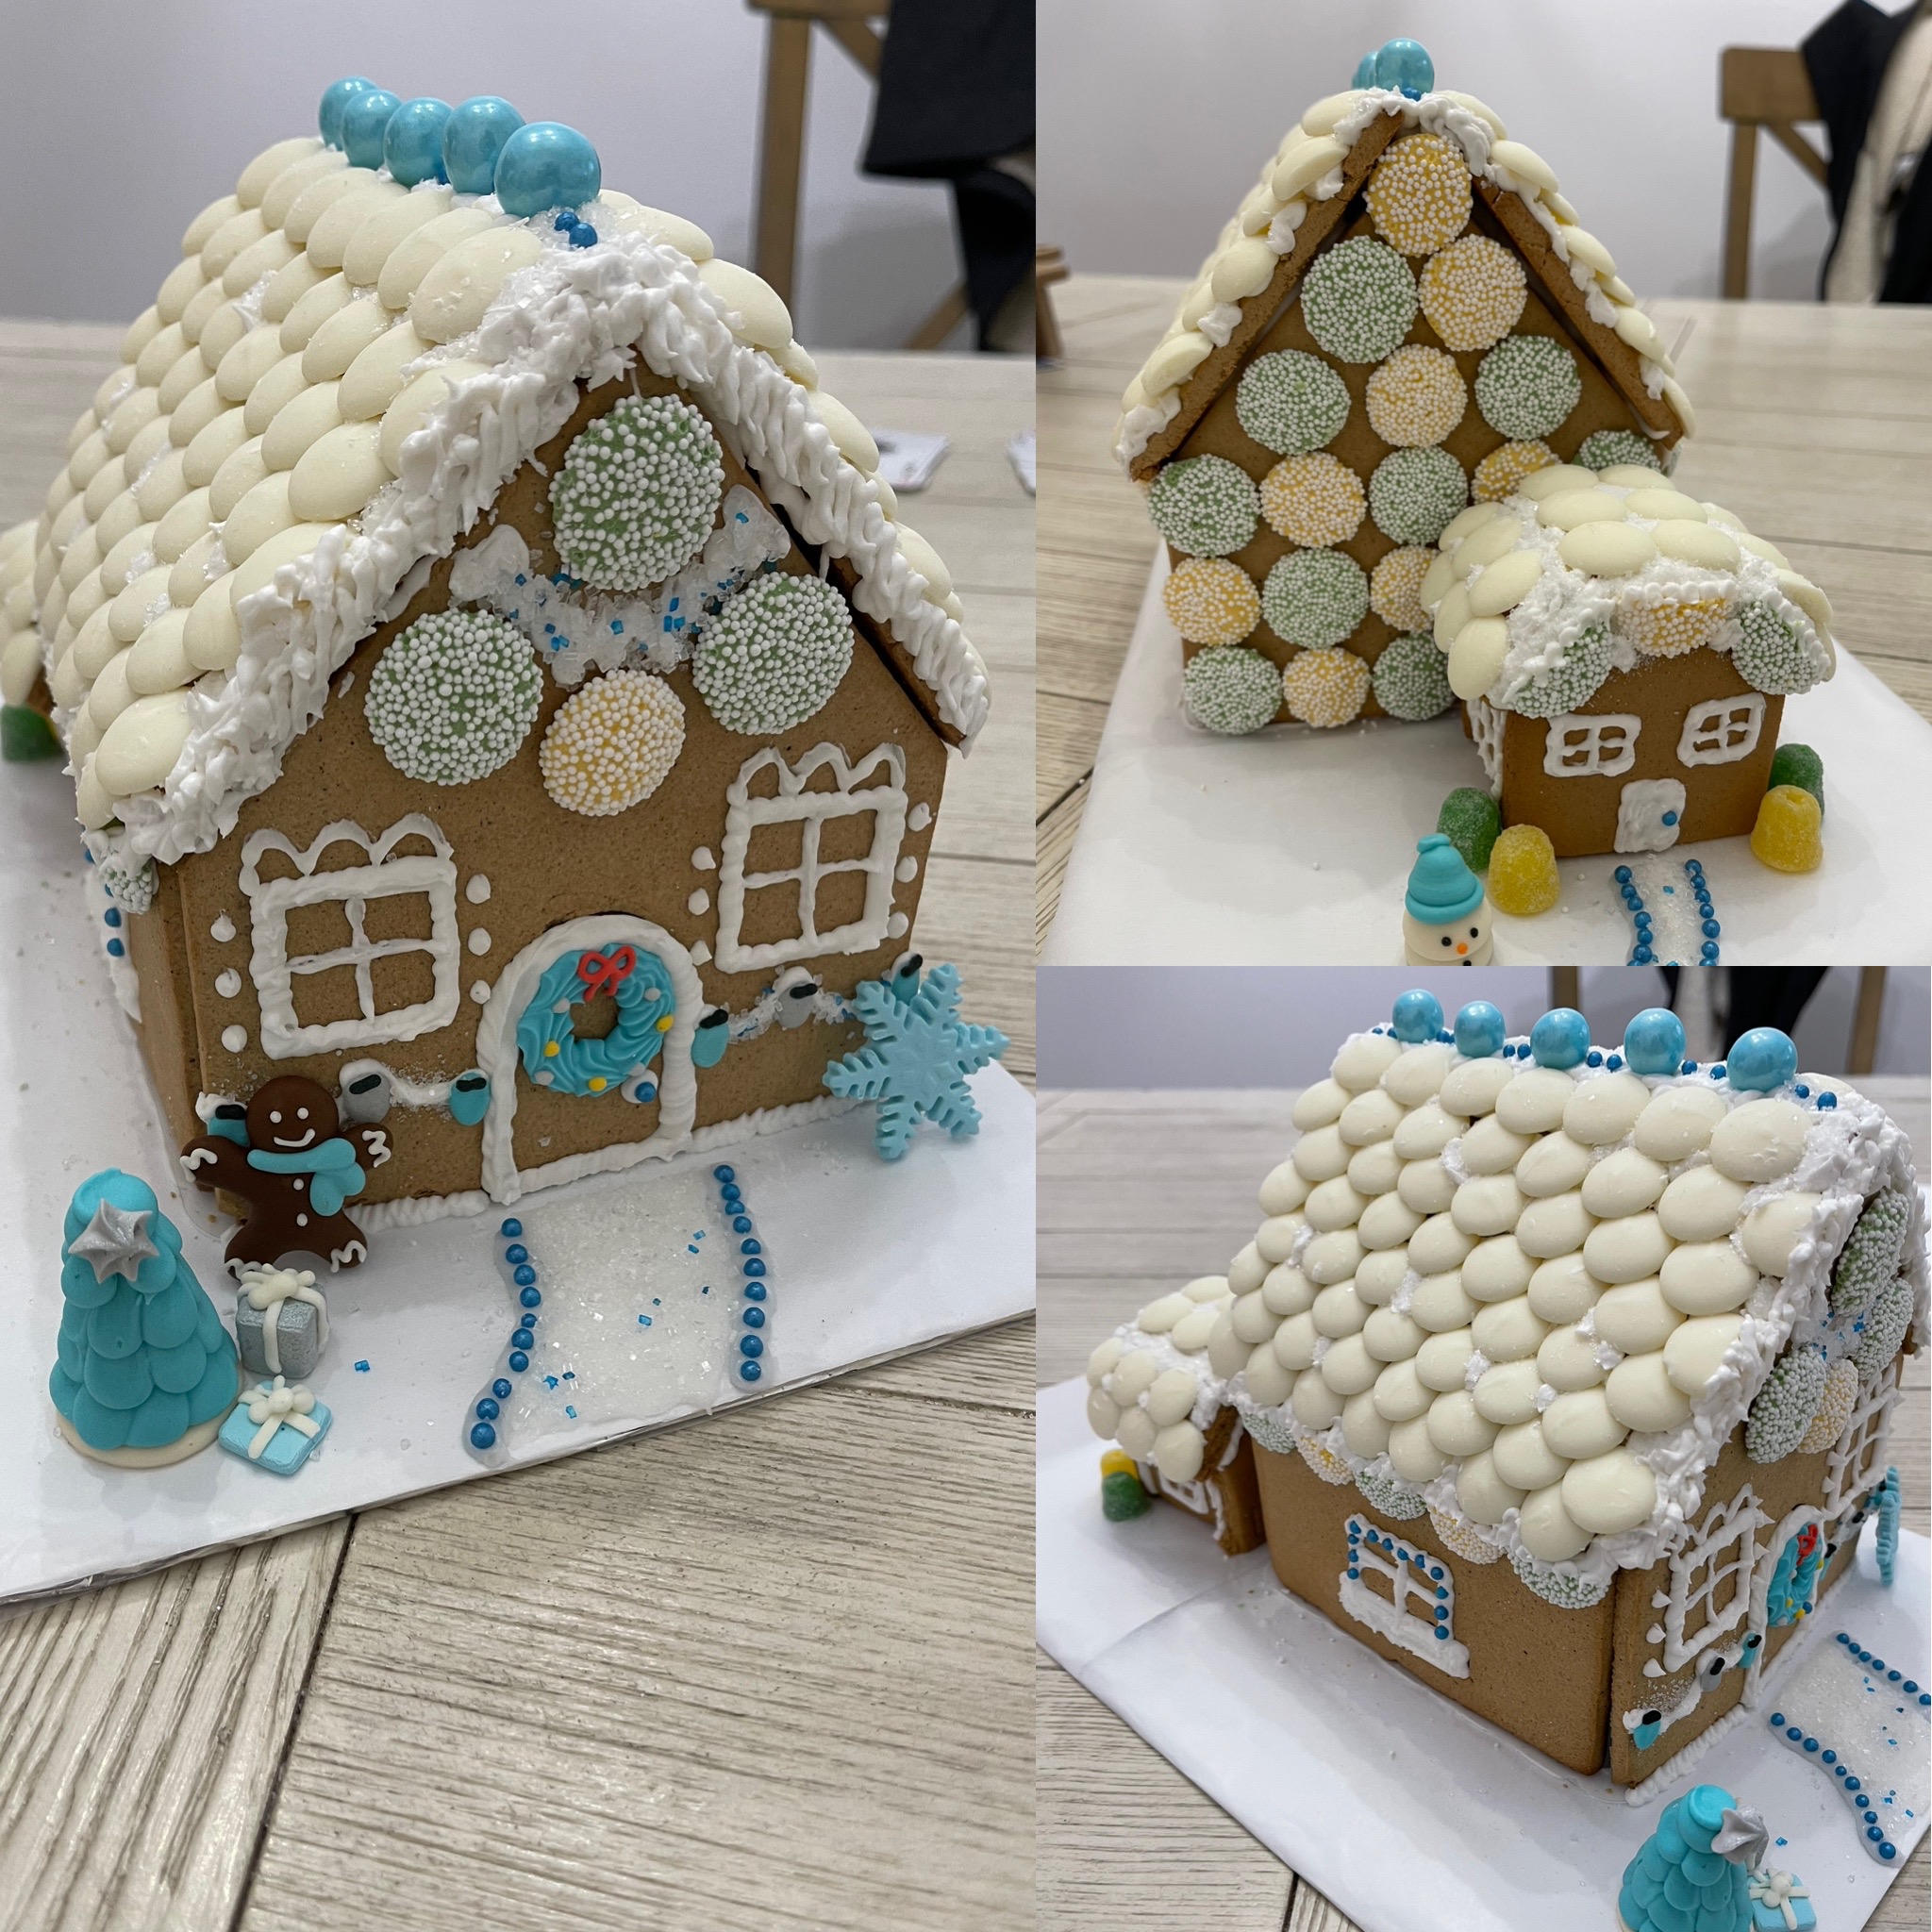 Three photos show a gingerbread with a fluffy white icing roof and candy circles on the walls.